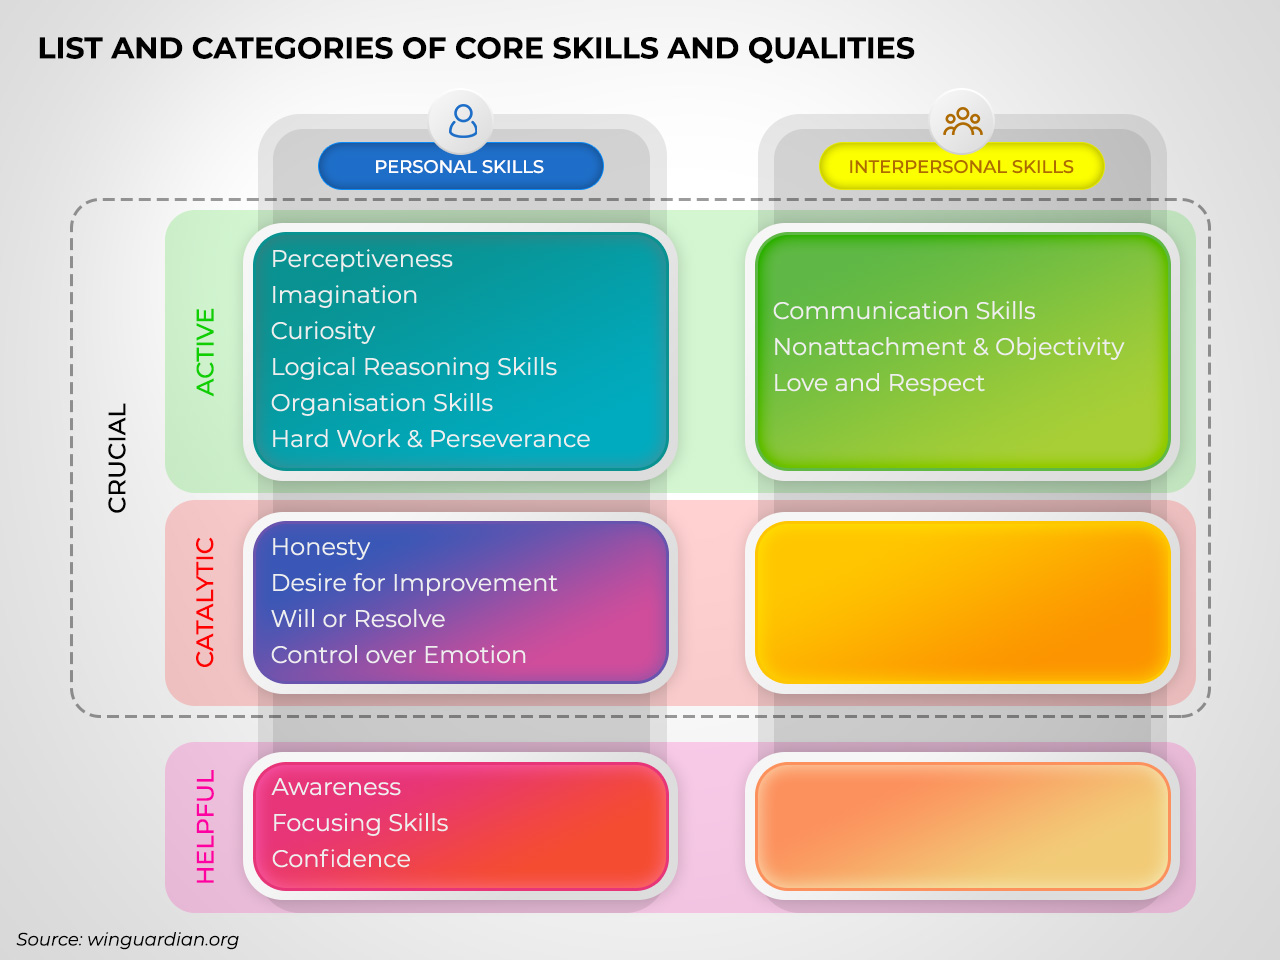 list of core skills and qualities in their categories